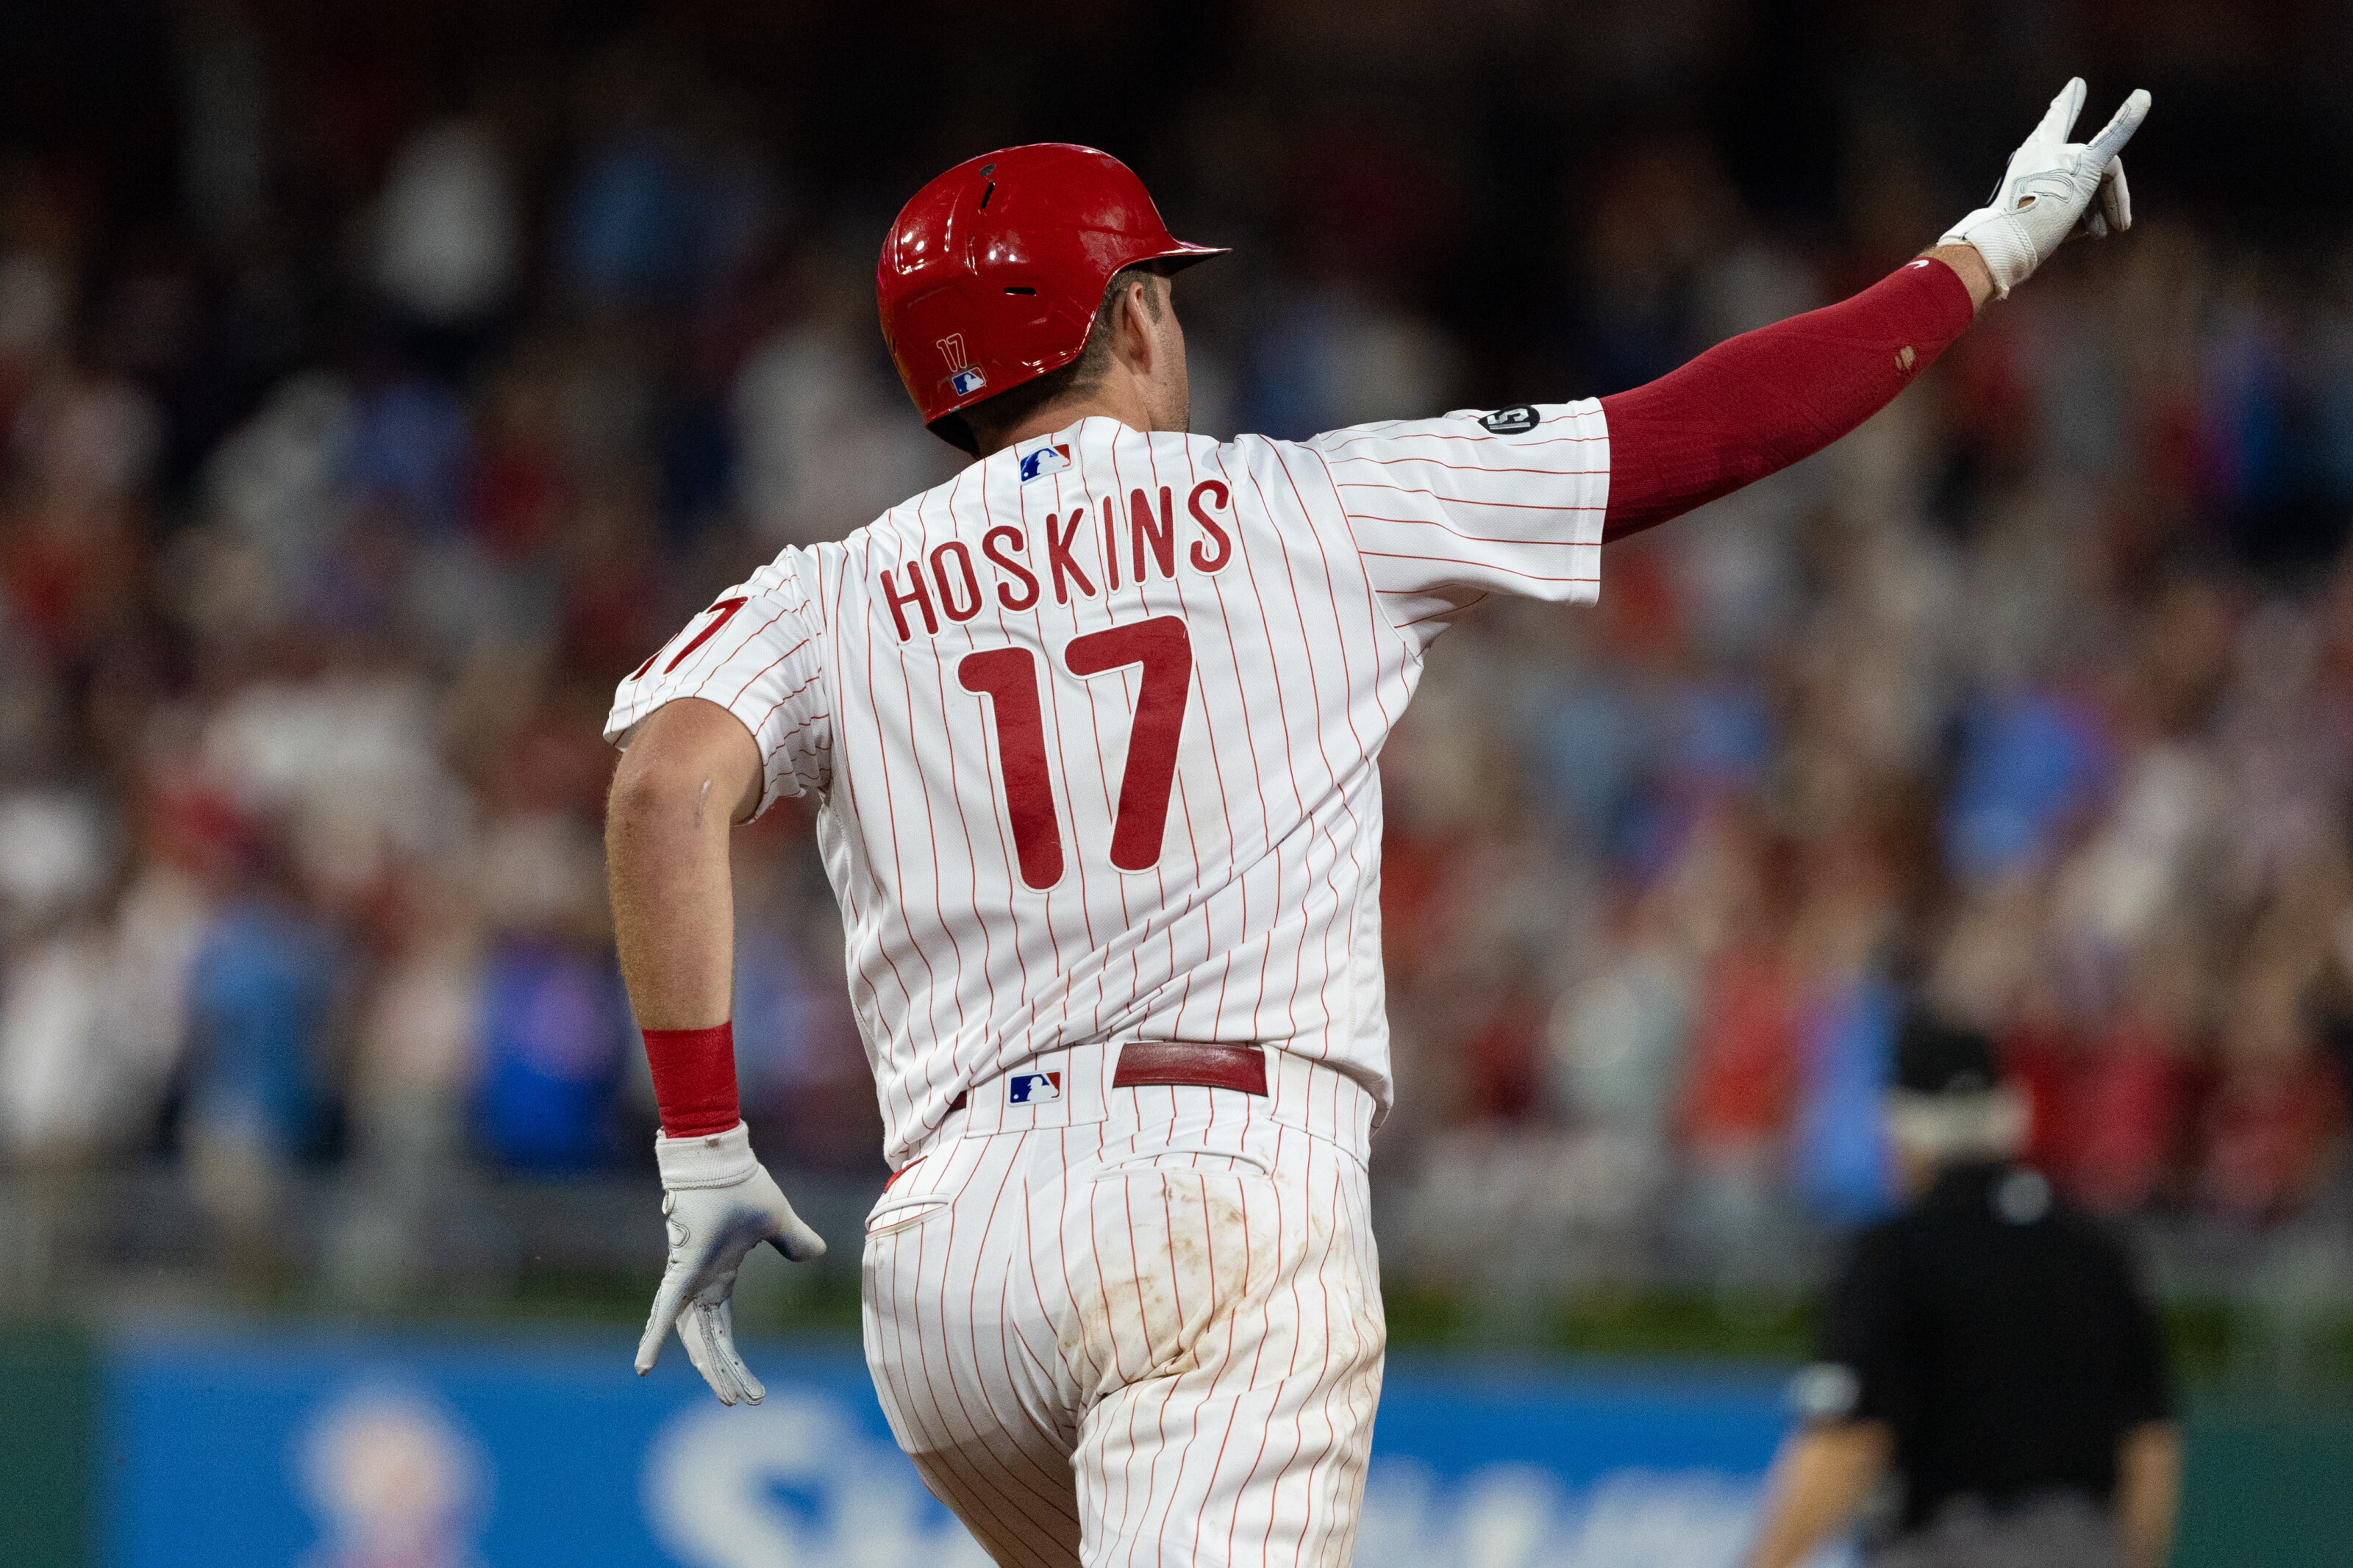 No longer 'jumping off the ledge,' Rhys Hoskins is putting together another  great year  Phillies Nation - Your source for Philadelphia Phillies news,  opinion, history, rumors, events, and other fun stuff.